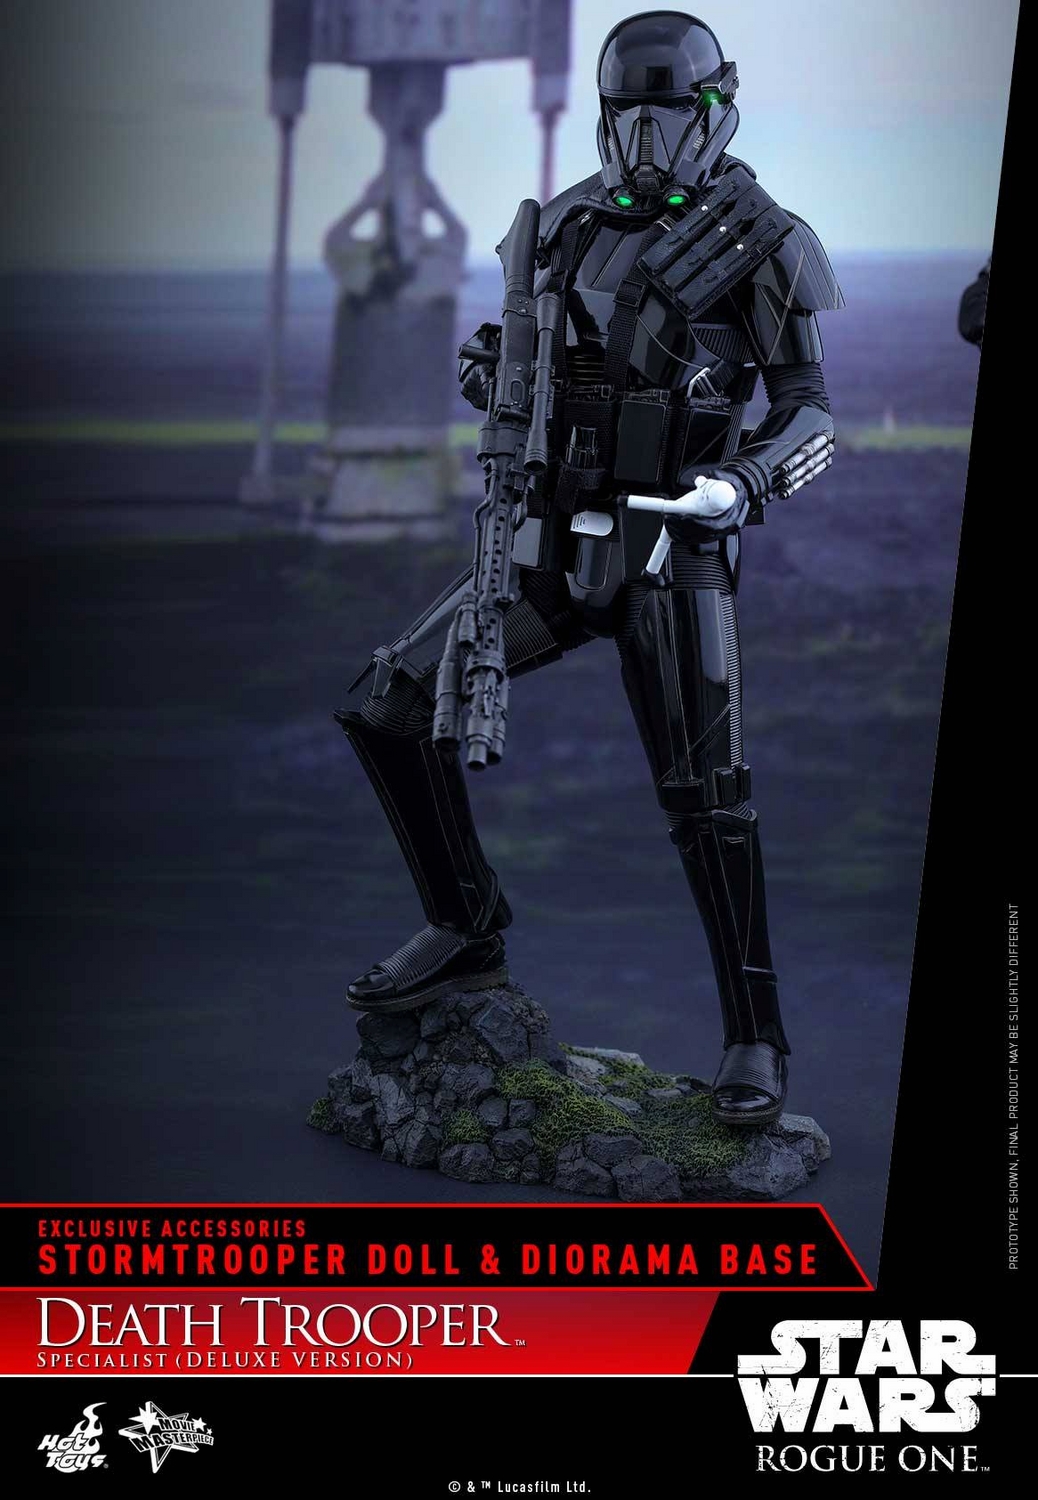 rogue-one-sixth-scale-death-trooper-specialist-deluxe-version-111516-003.jpg